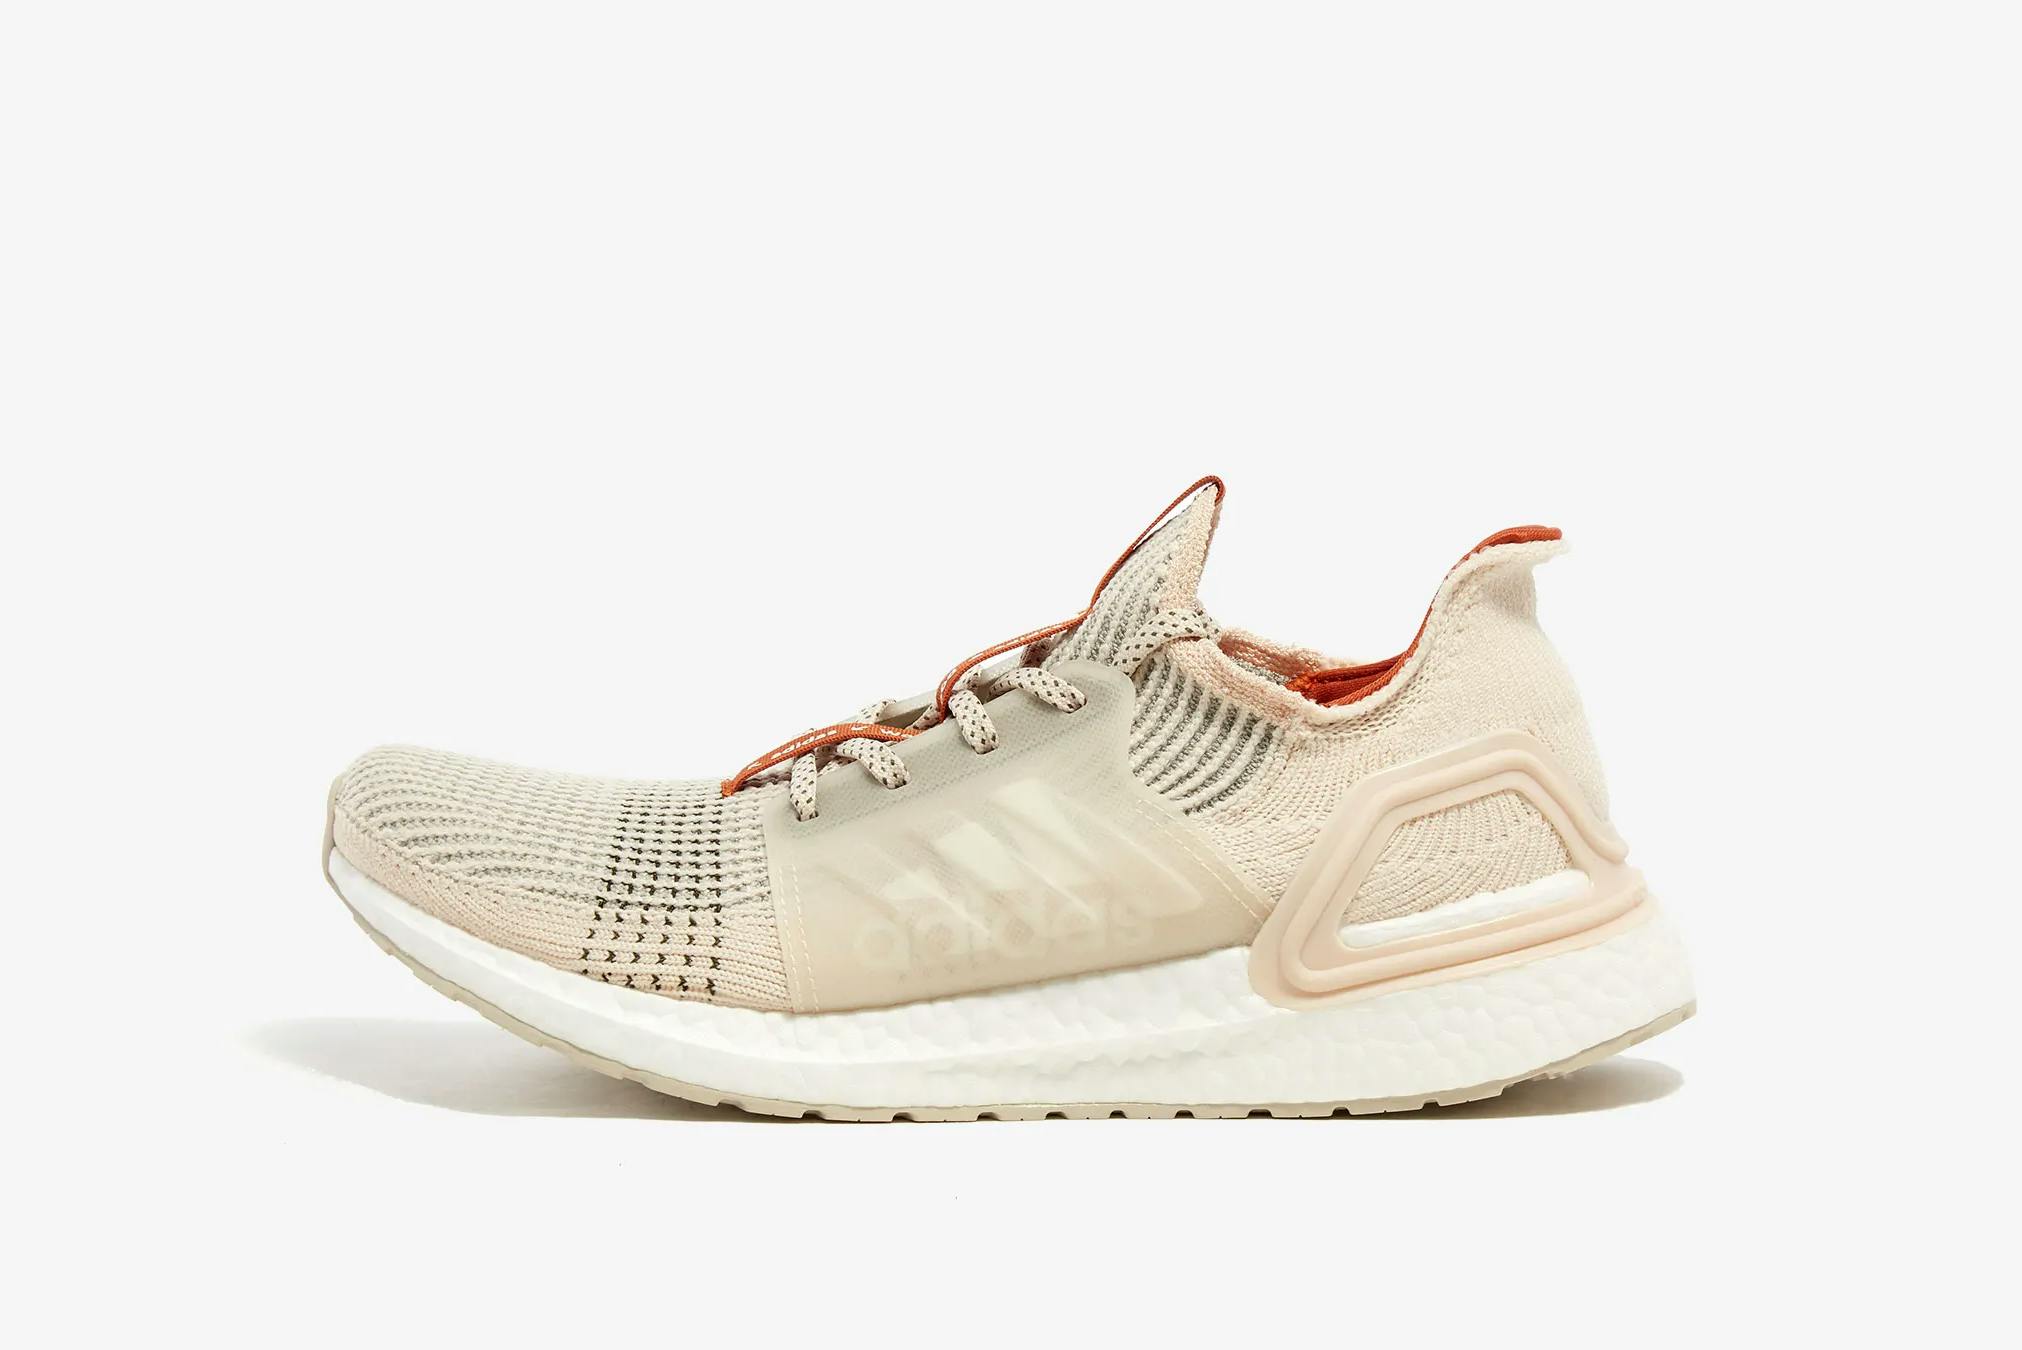 adidas x Wood Ultraboost 19 Register Now on END. (US) Launches | END. (US)